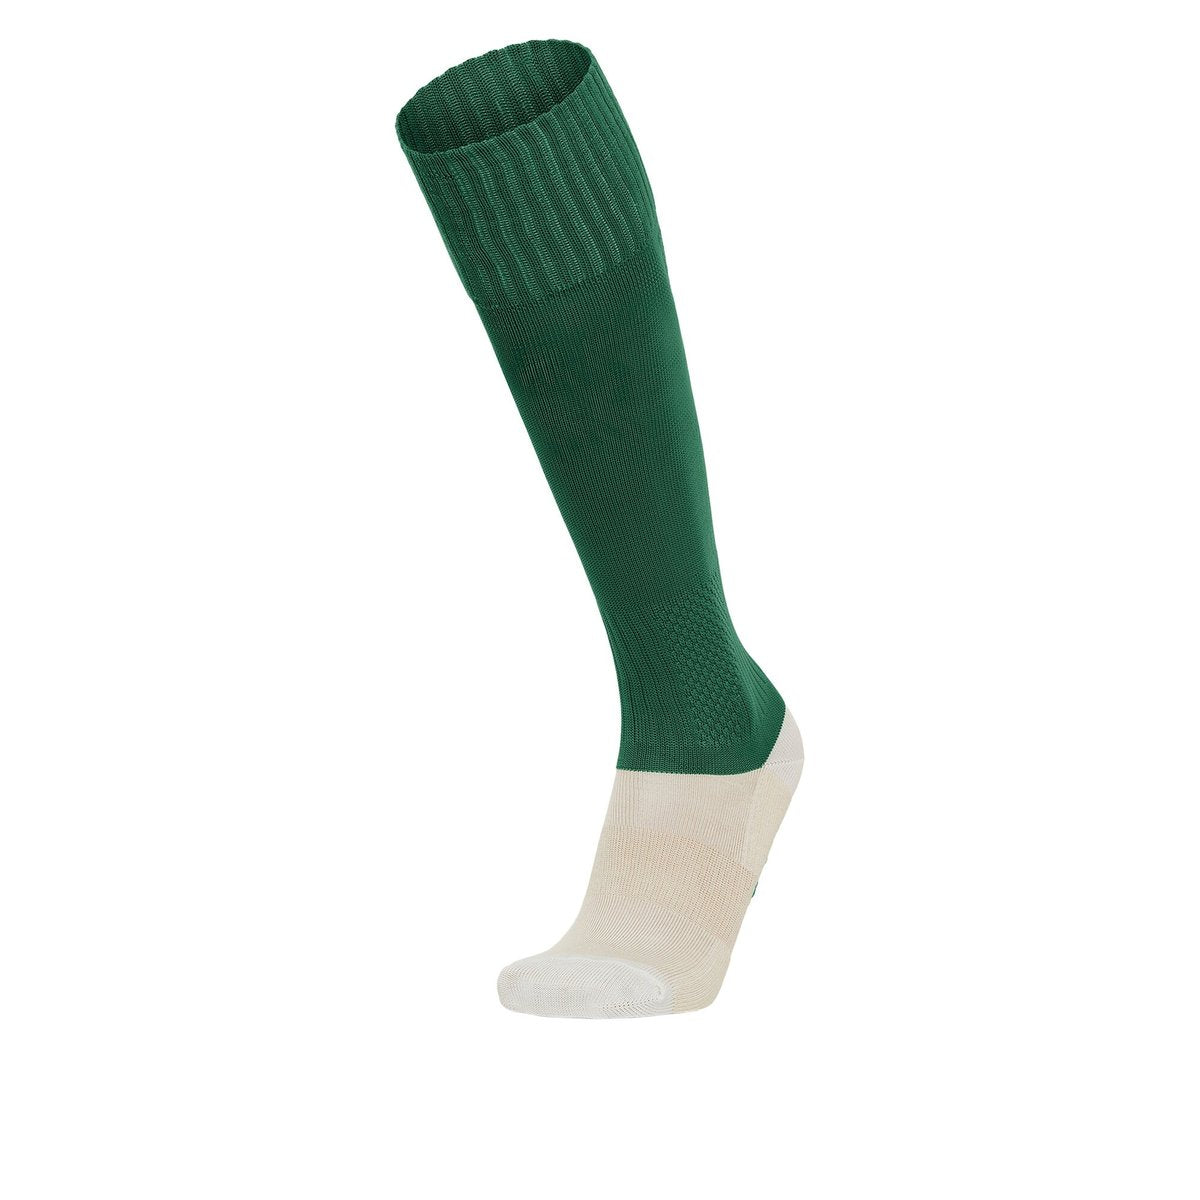 Macron Round Match Sock - Bottle Green (Pack of 5)